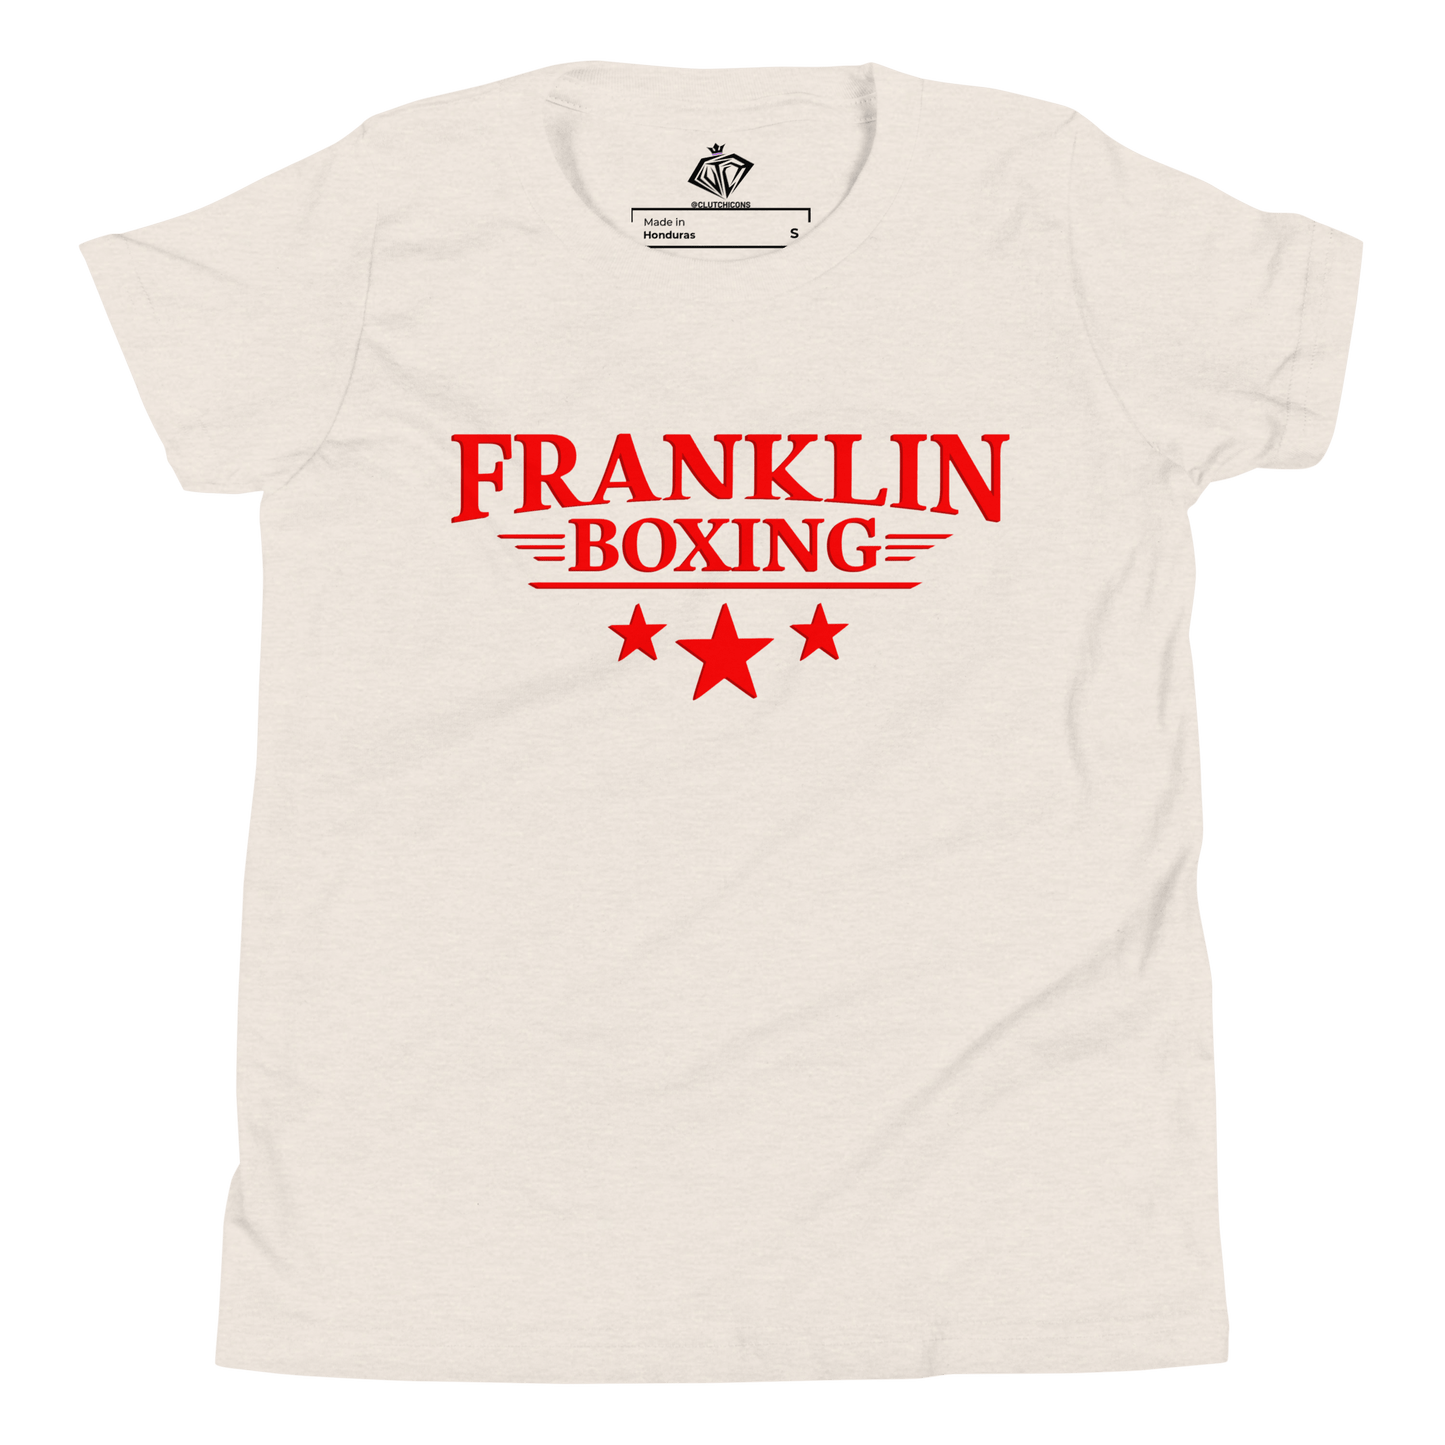 Franklin Boxing | Youth Red Staple Cotton Shirt - Clutch -